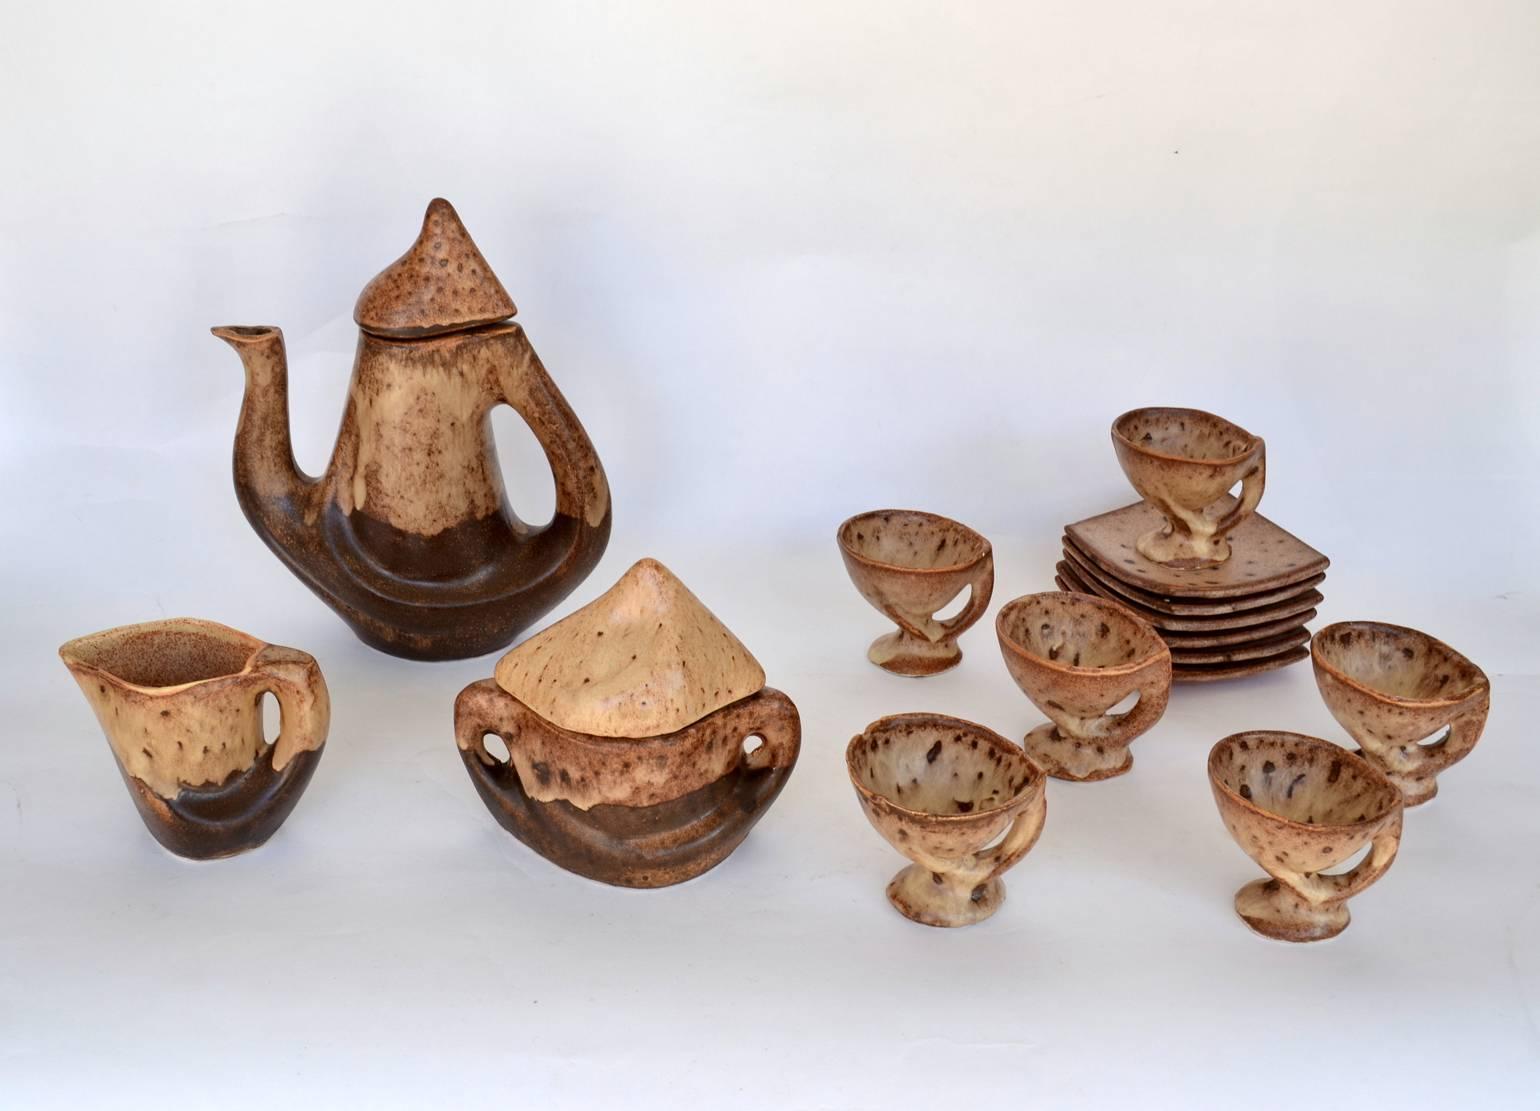 Organic studio pottery tea set for six servings, hand crafted and hand-painted in earth tones, by Vallauris France 1970s (French village on the Riviera where Picasso has worked.)

Six cups with plates (Cup: H. 8 cm x diameter 9 cm plate: 12.5 cm x